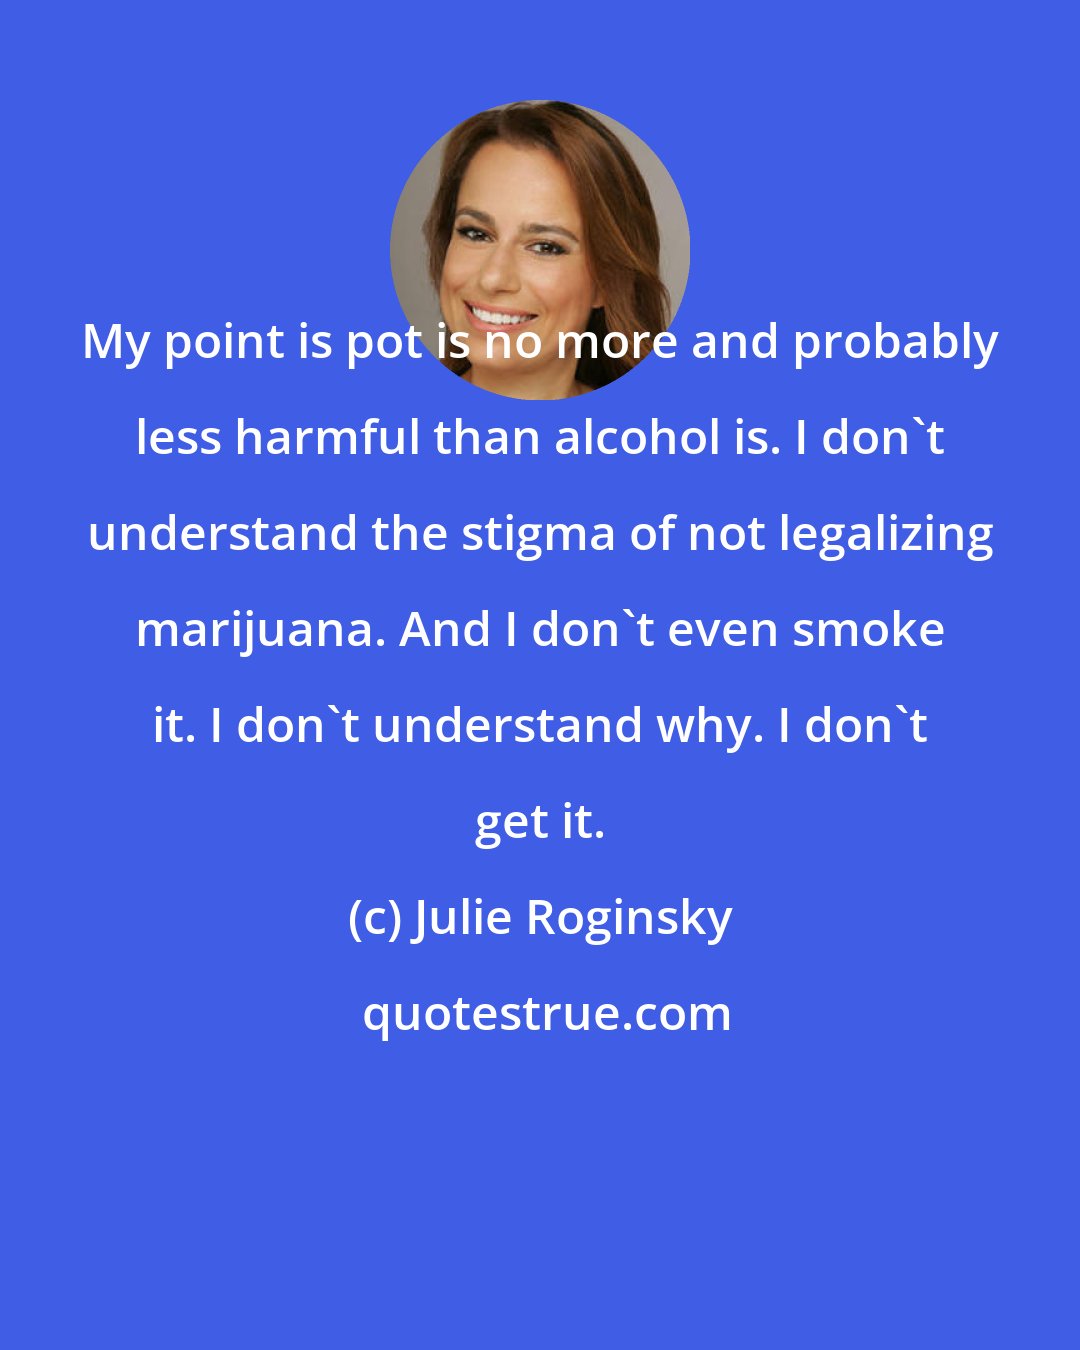 Julie Roginsky: My point is pot is no more and probably less harmful than alcohol is. I don't understand the stigma of not legalizing marijuana. And I don't even smoke it. I don't understand why. I don't get it.